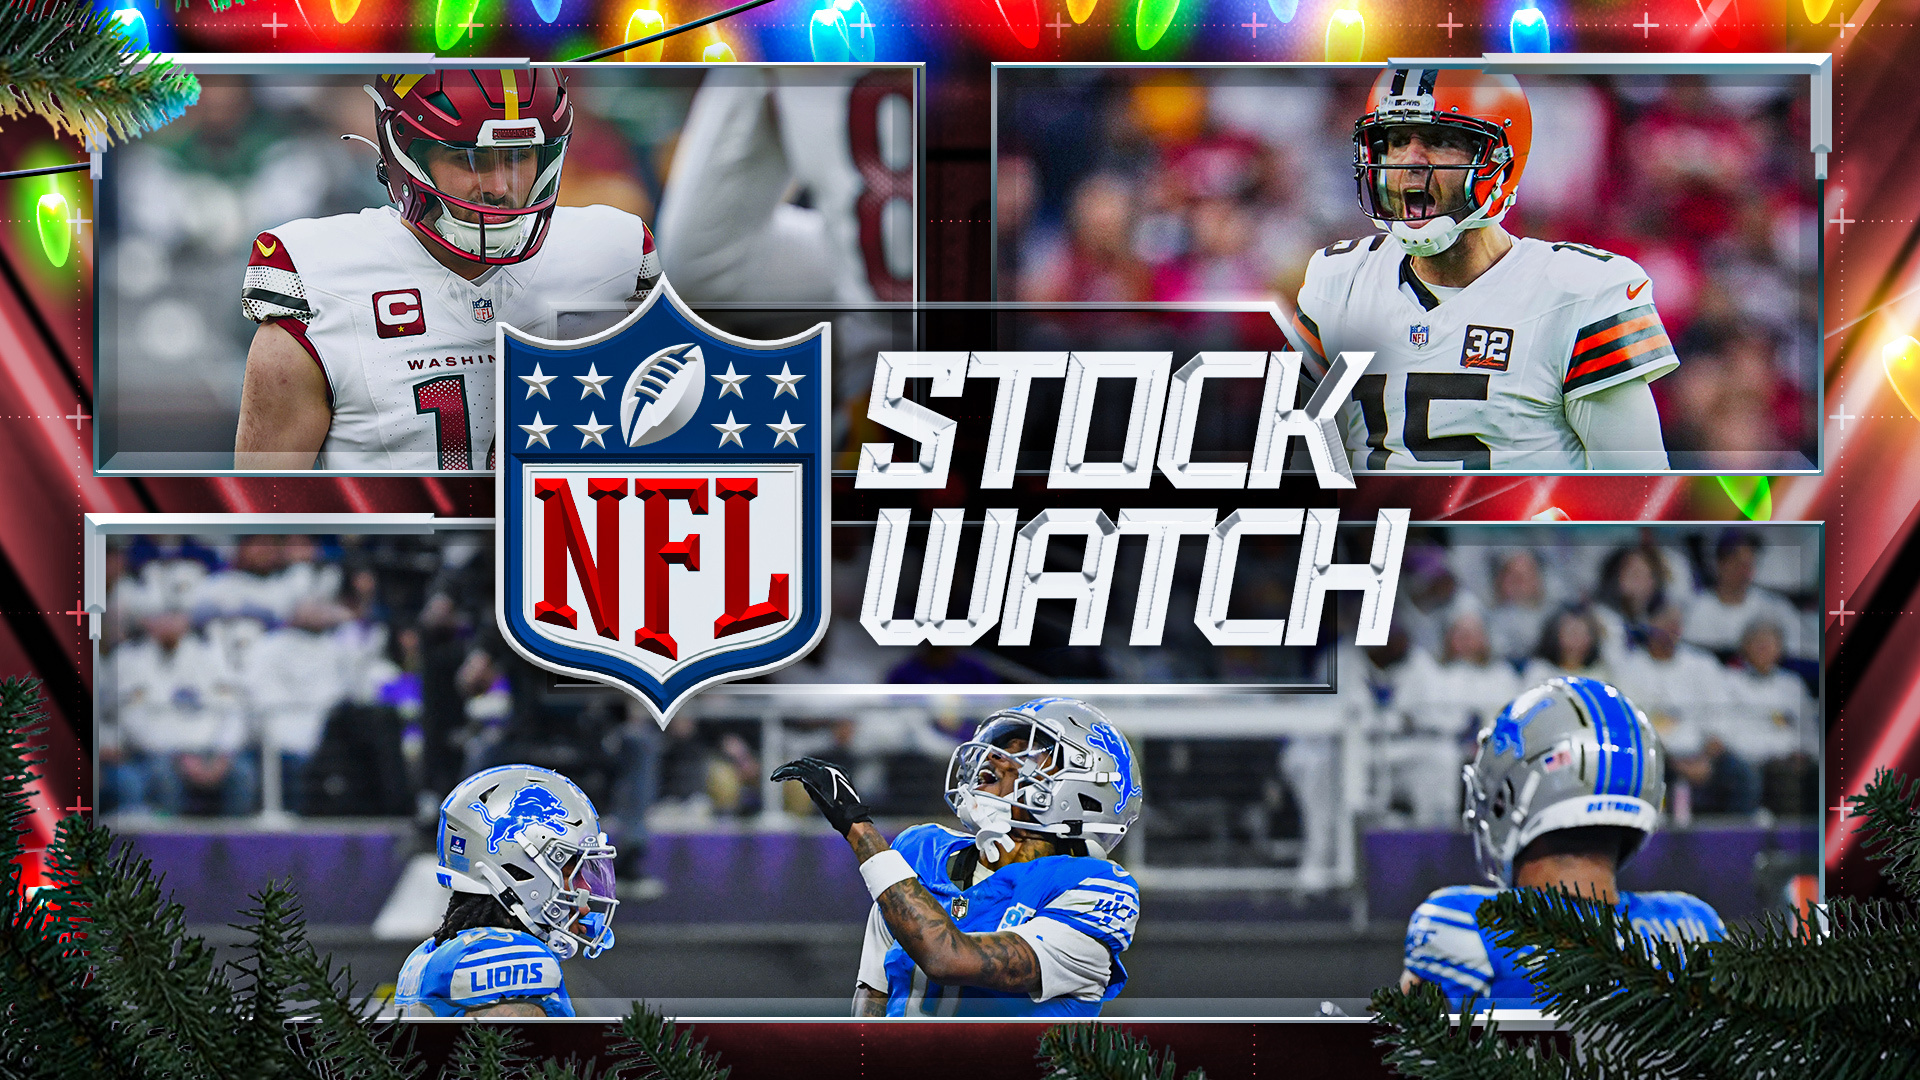 NFL Stock Watch: Lions make history; Cowboys fall short in critical spots